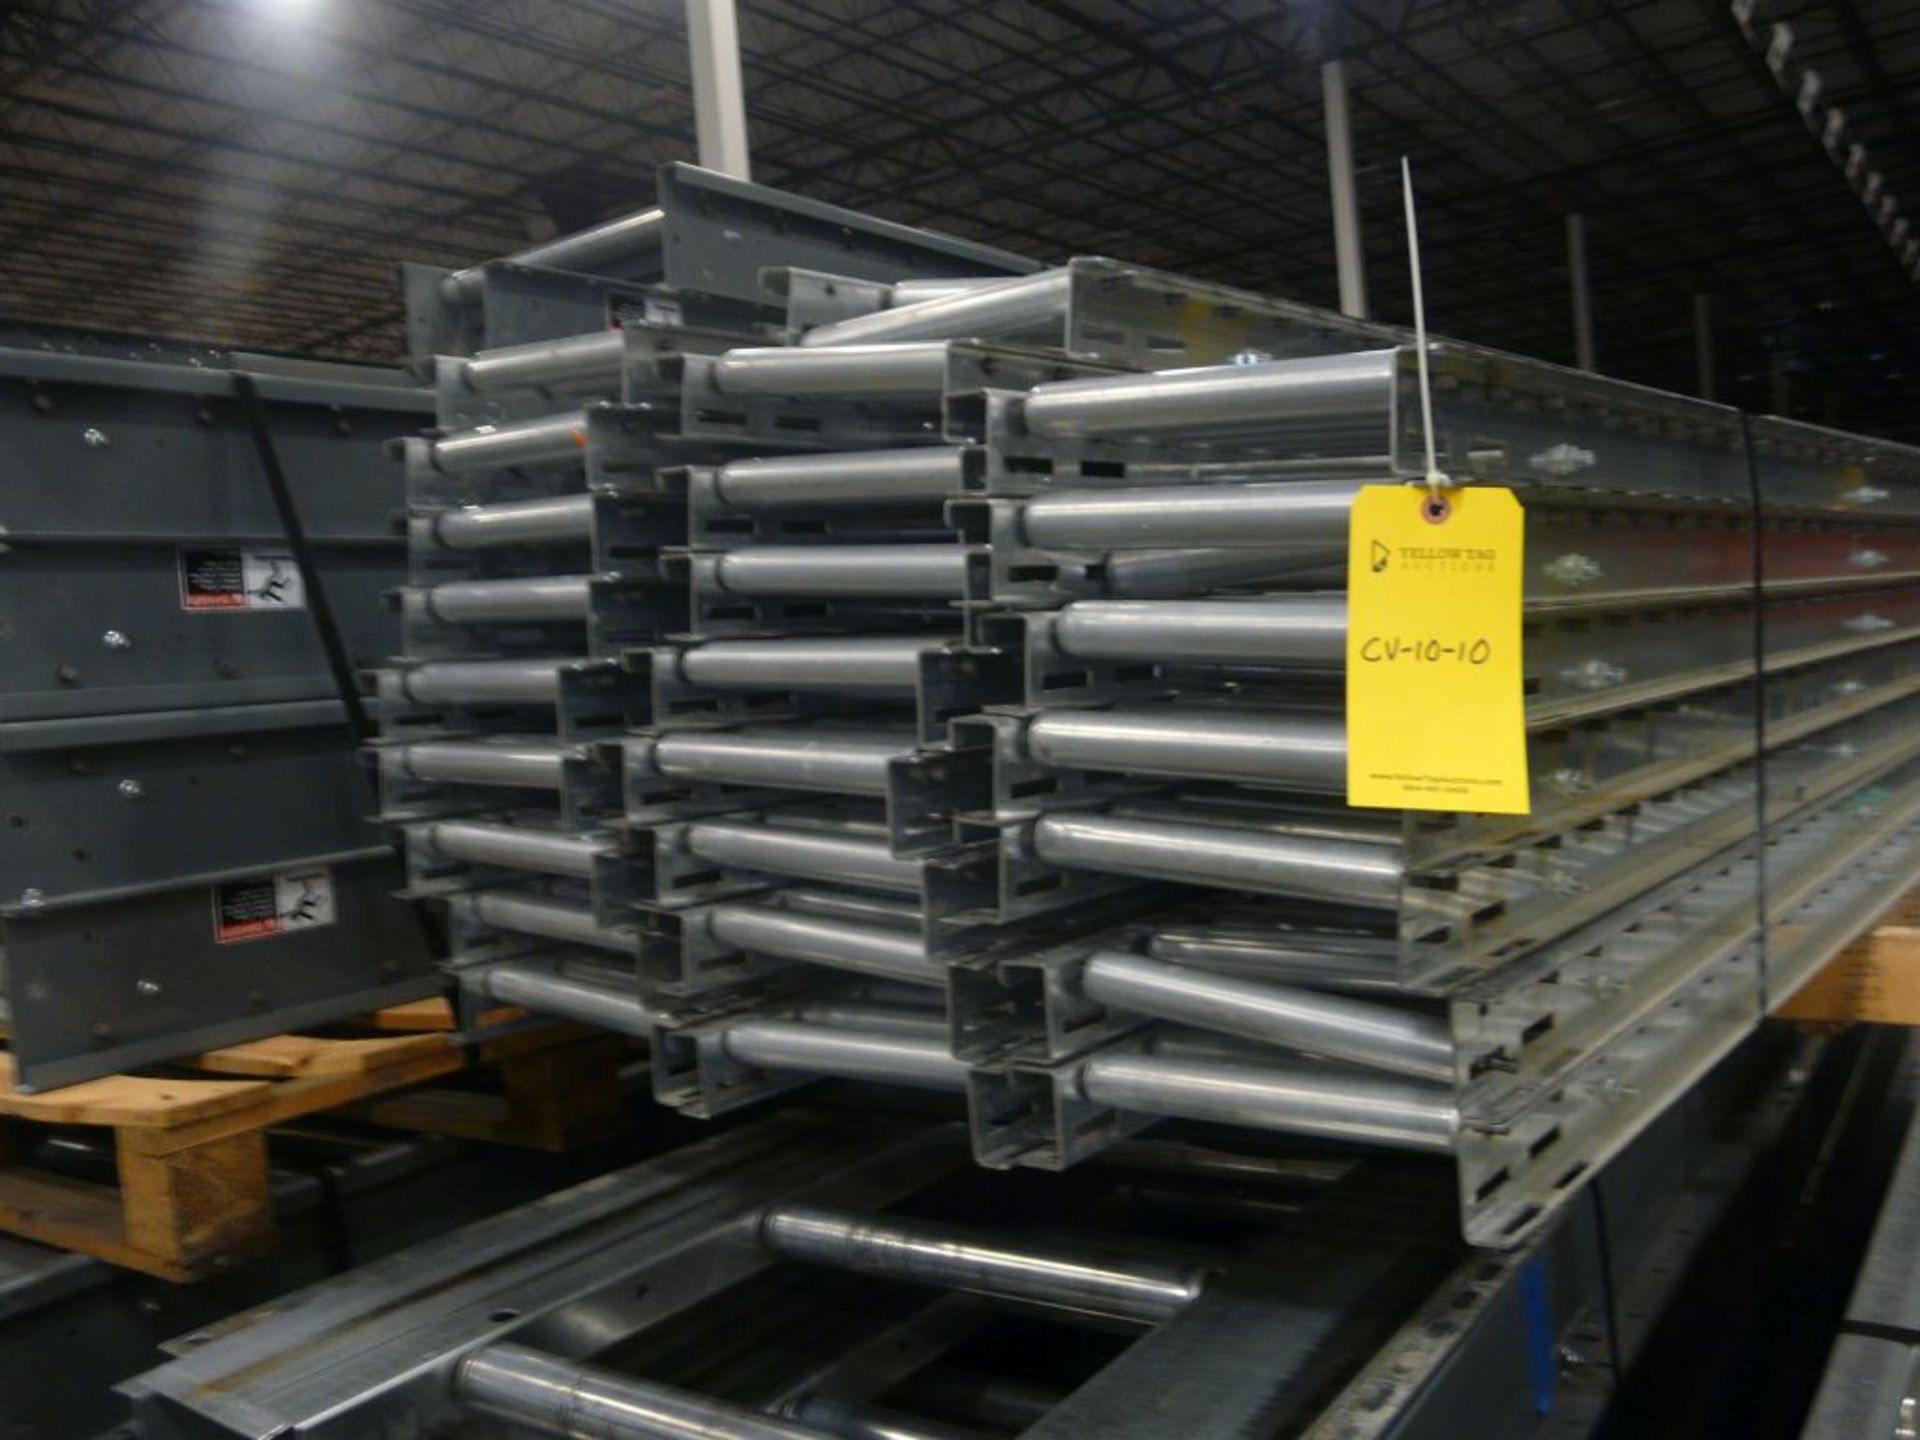 Lot of (26) Conveyors - 10'L x 10"W; Tag: 223543 - $30 Lot Loading Fee - Image 2 of 2